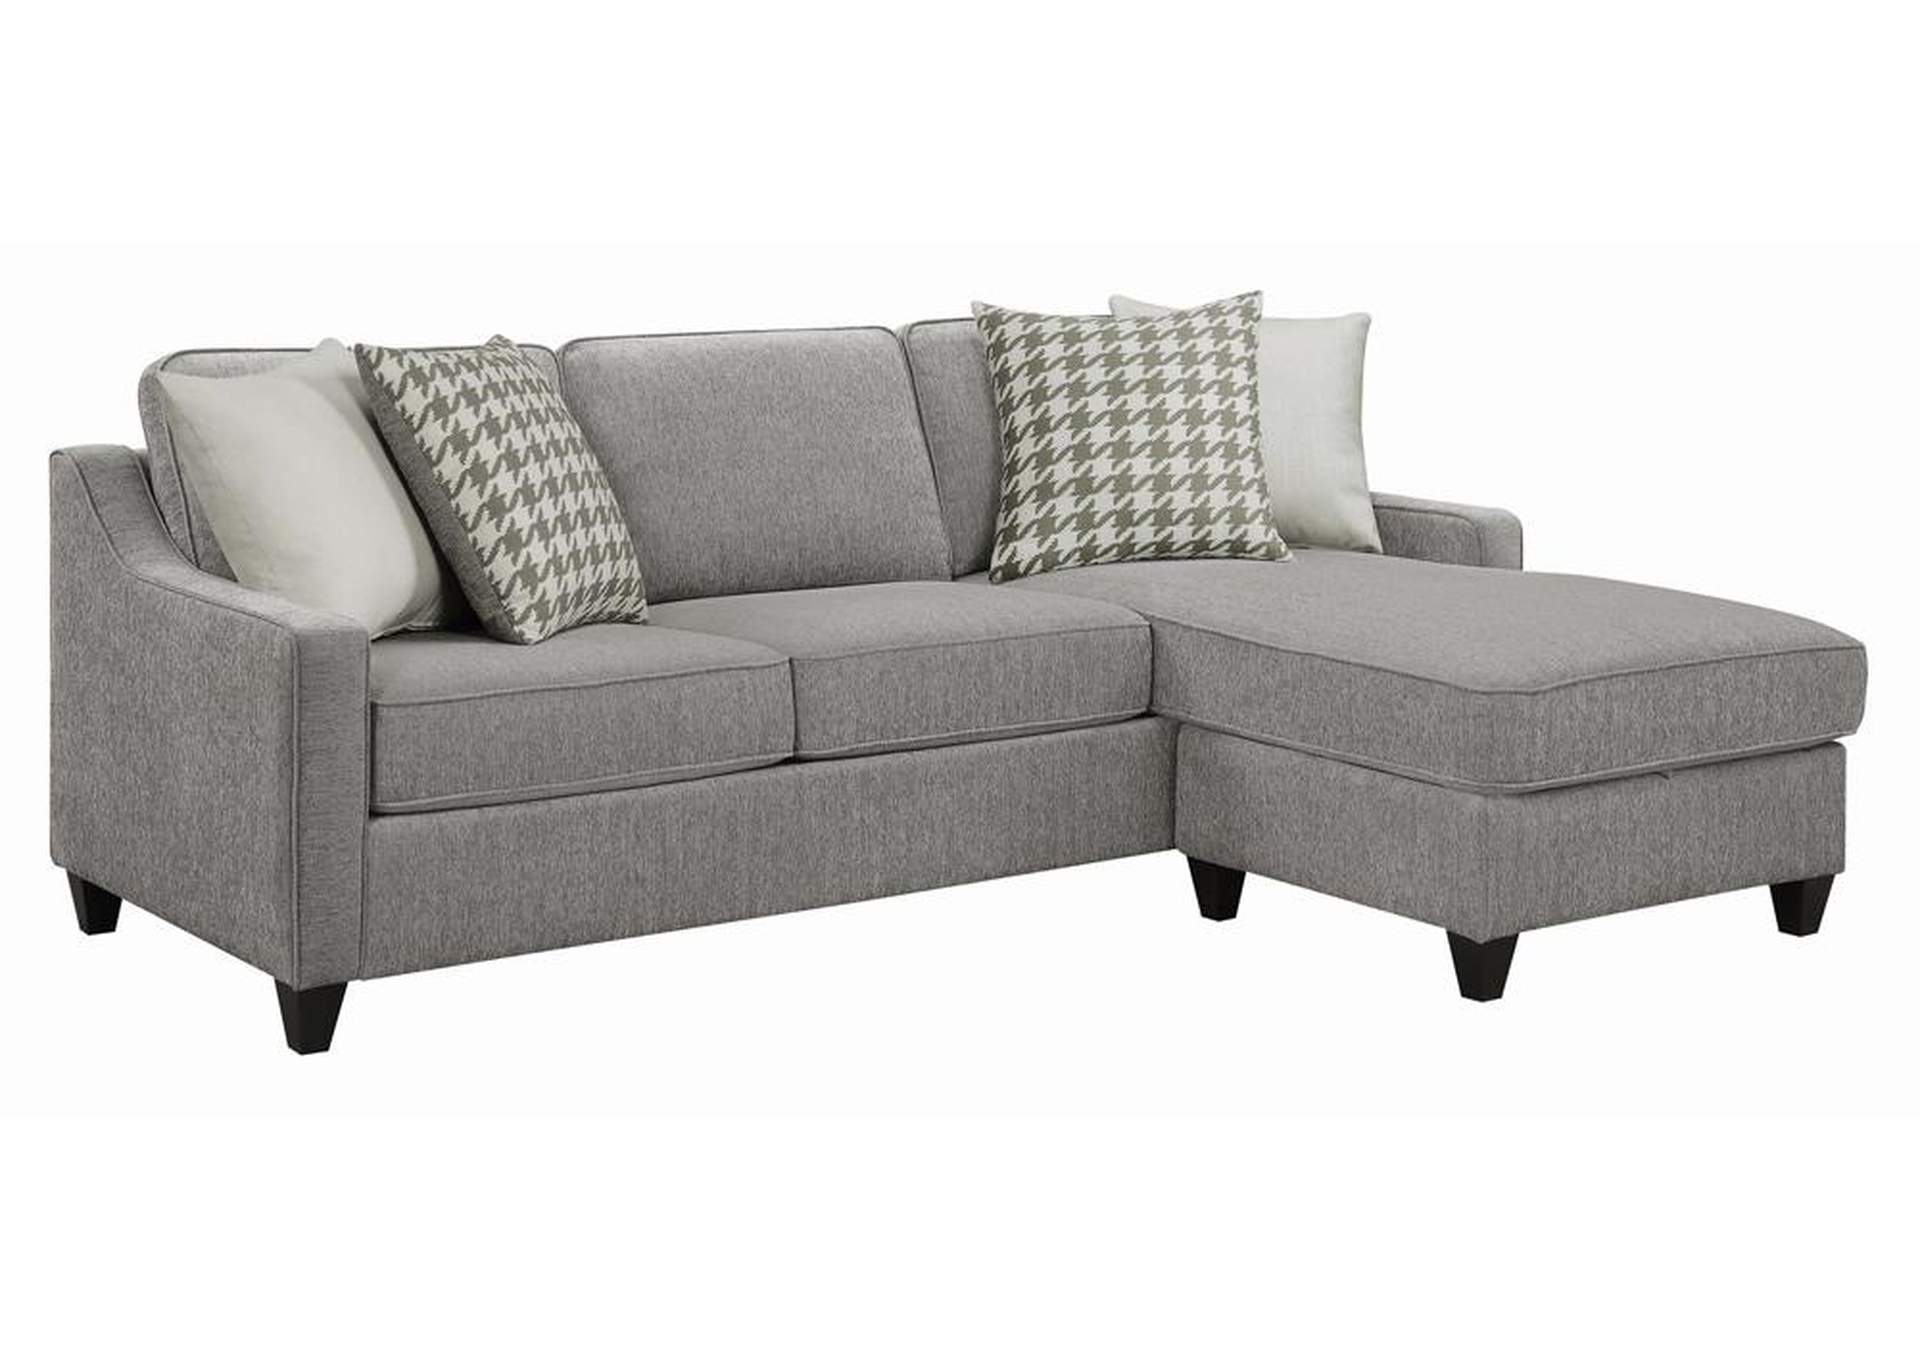 Charcoal Sectional,Coaster Furniture